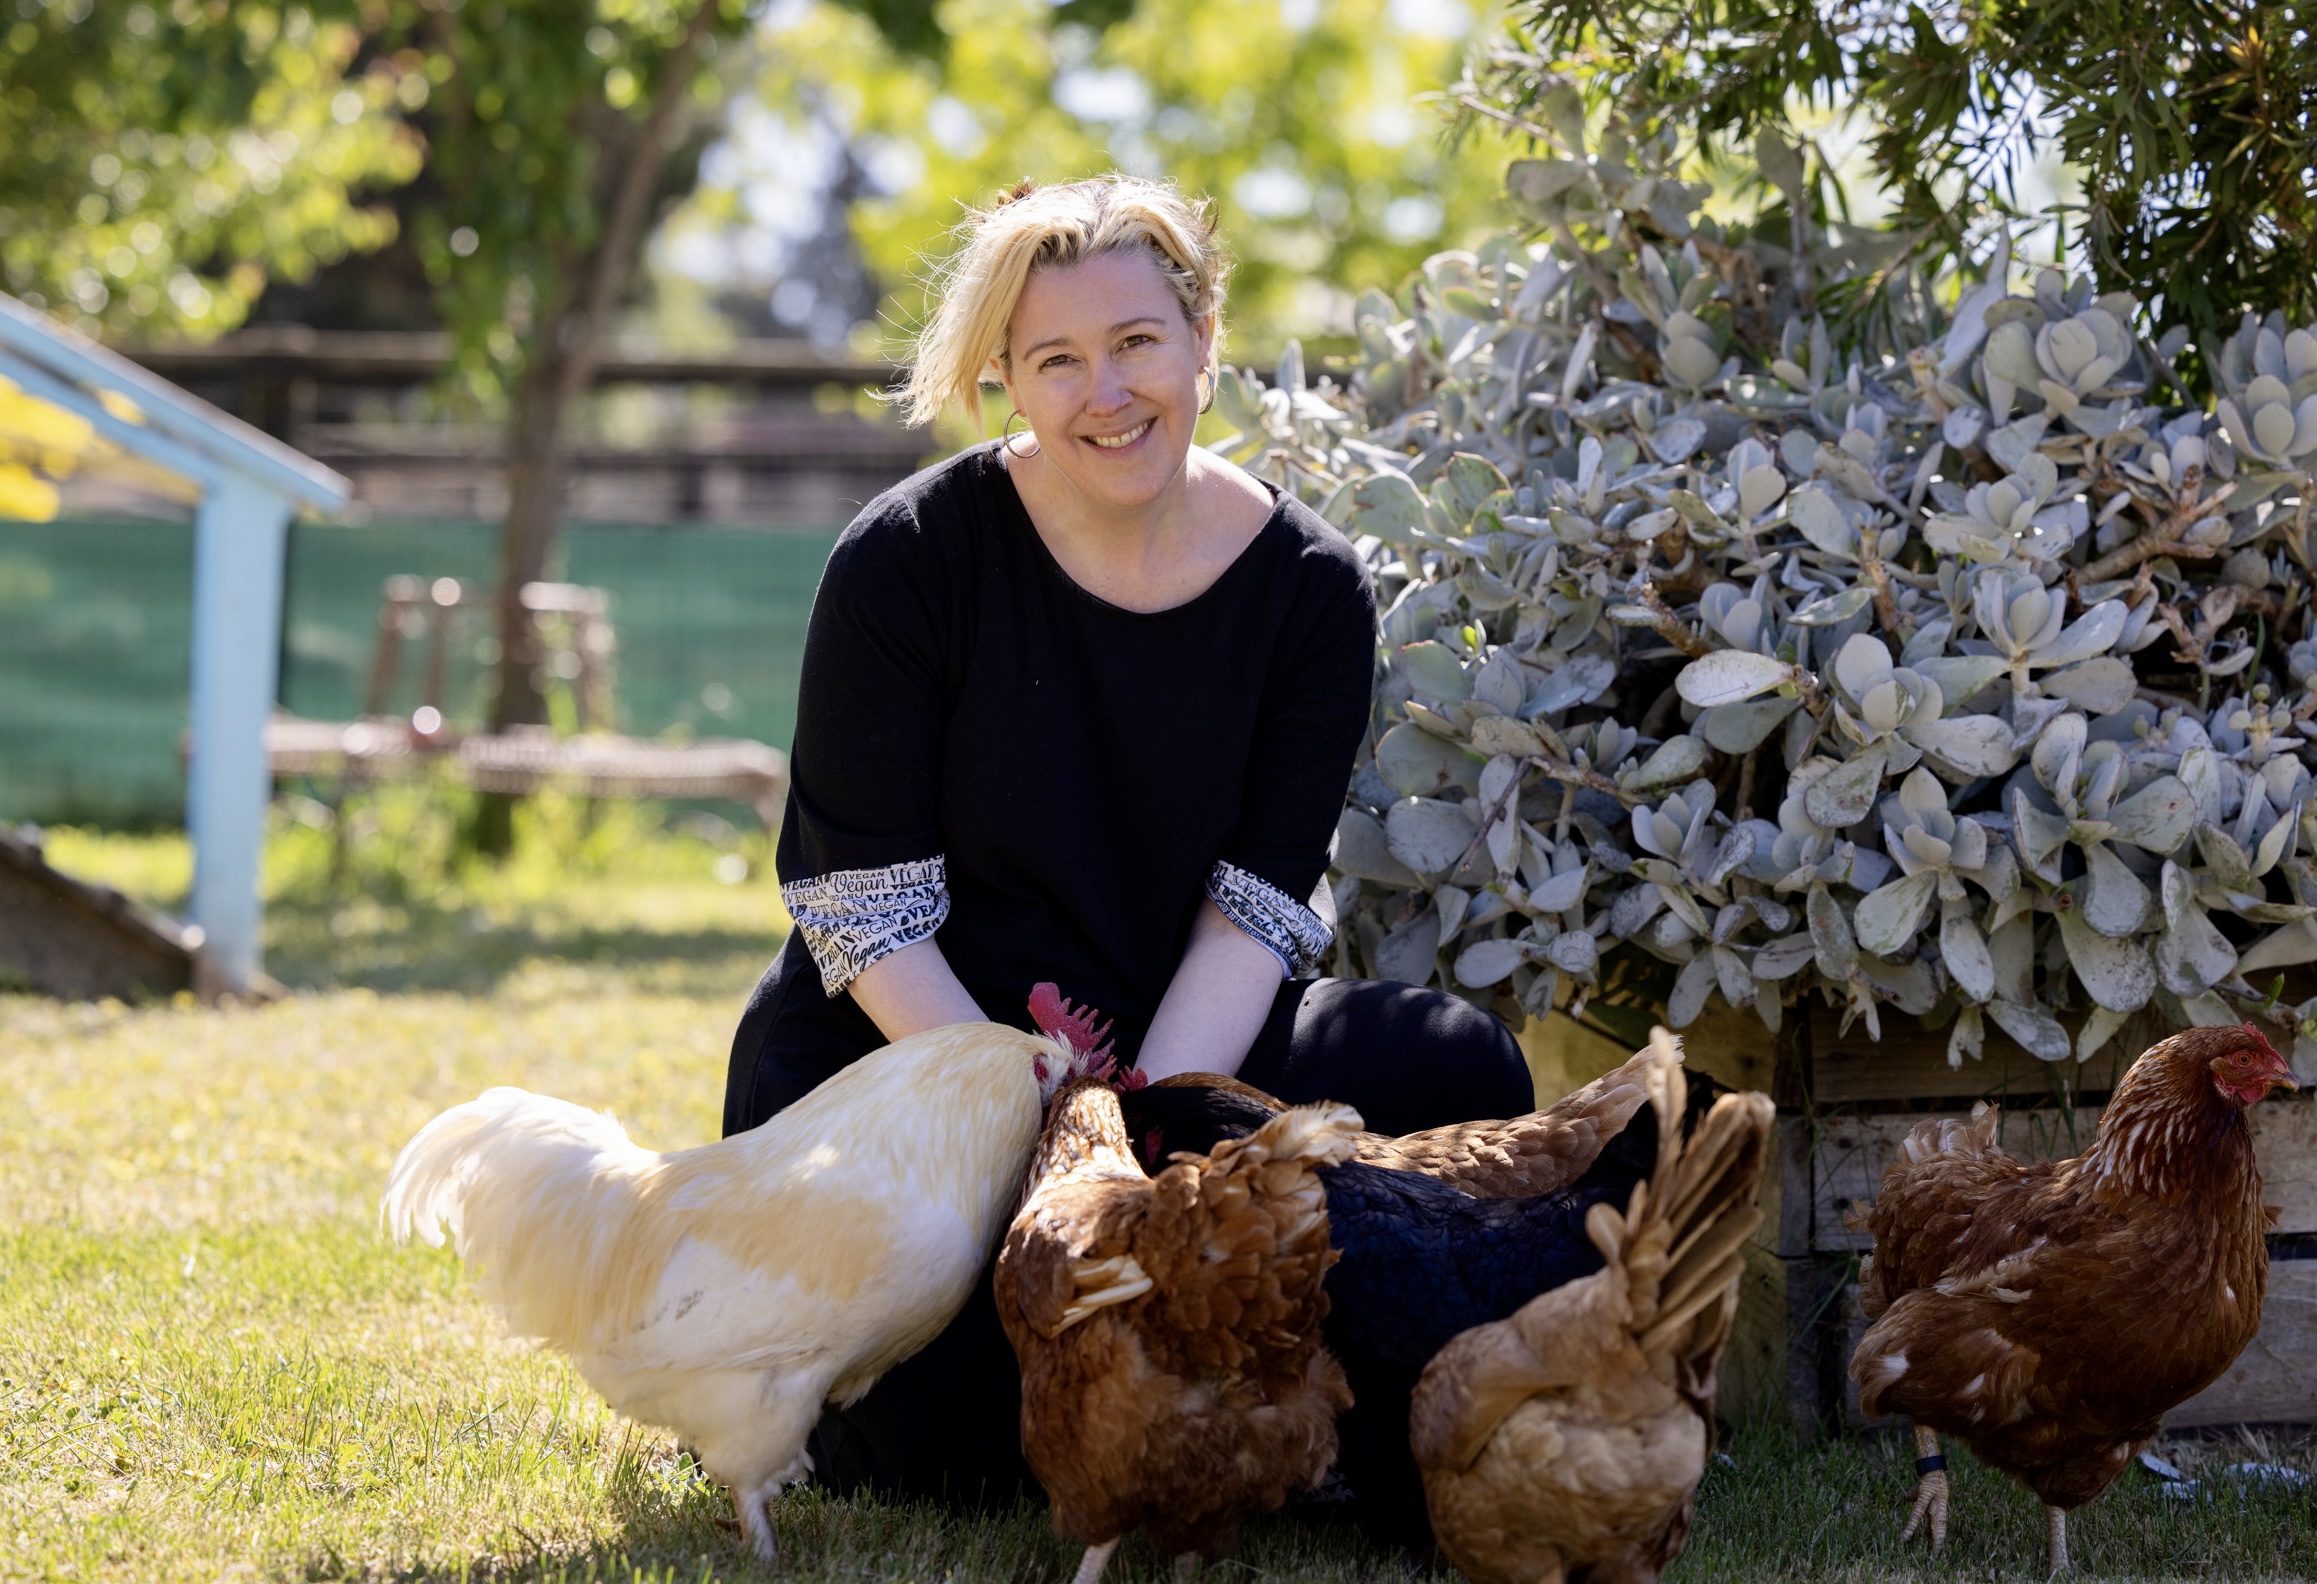 Picture of Vegan Australia CEO Dr Heidi Nicholl kneeling. She is wearing a black dress with rescued chickens feeding from her hands